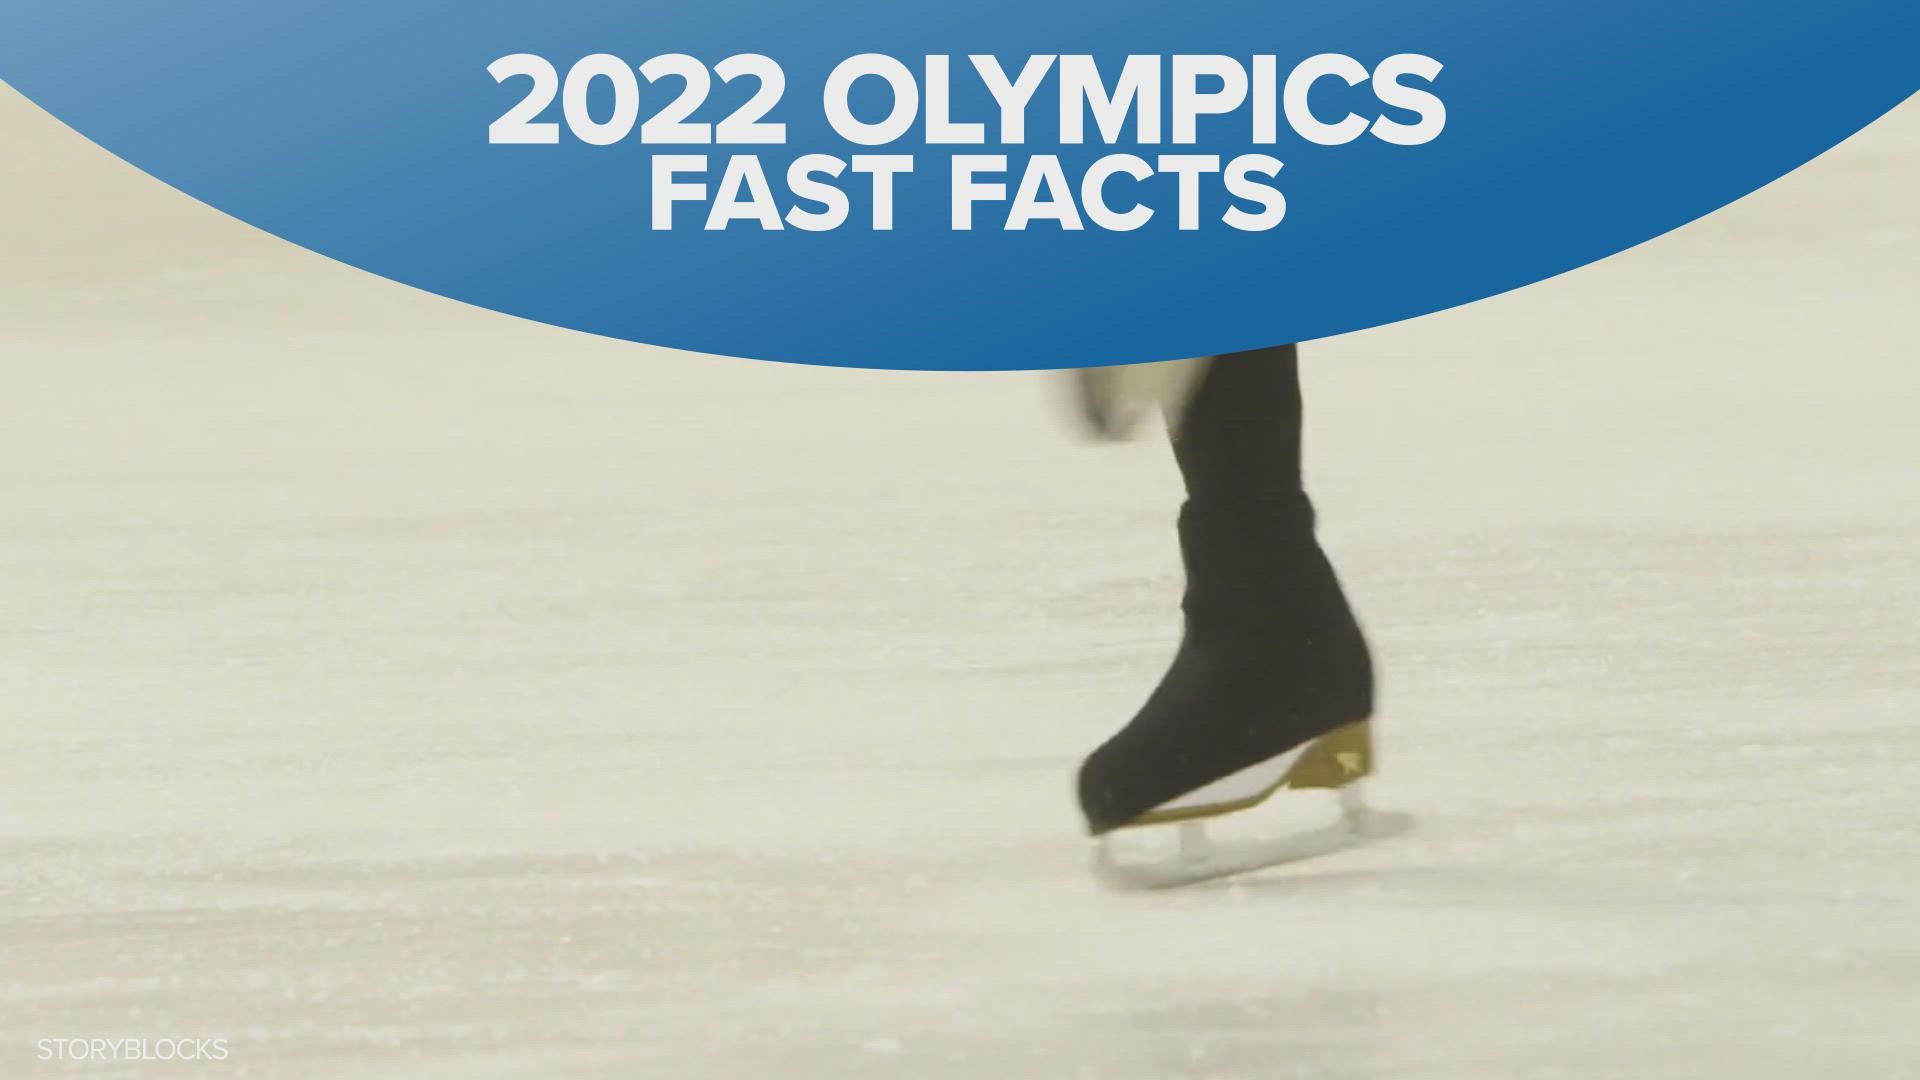 Some quick facts about the 2022 Winter Olympics in Beijing, China.